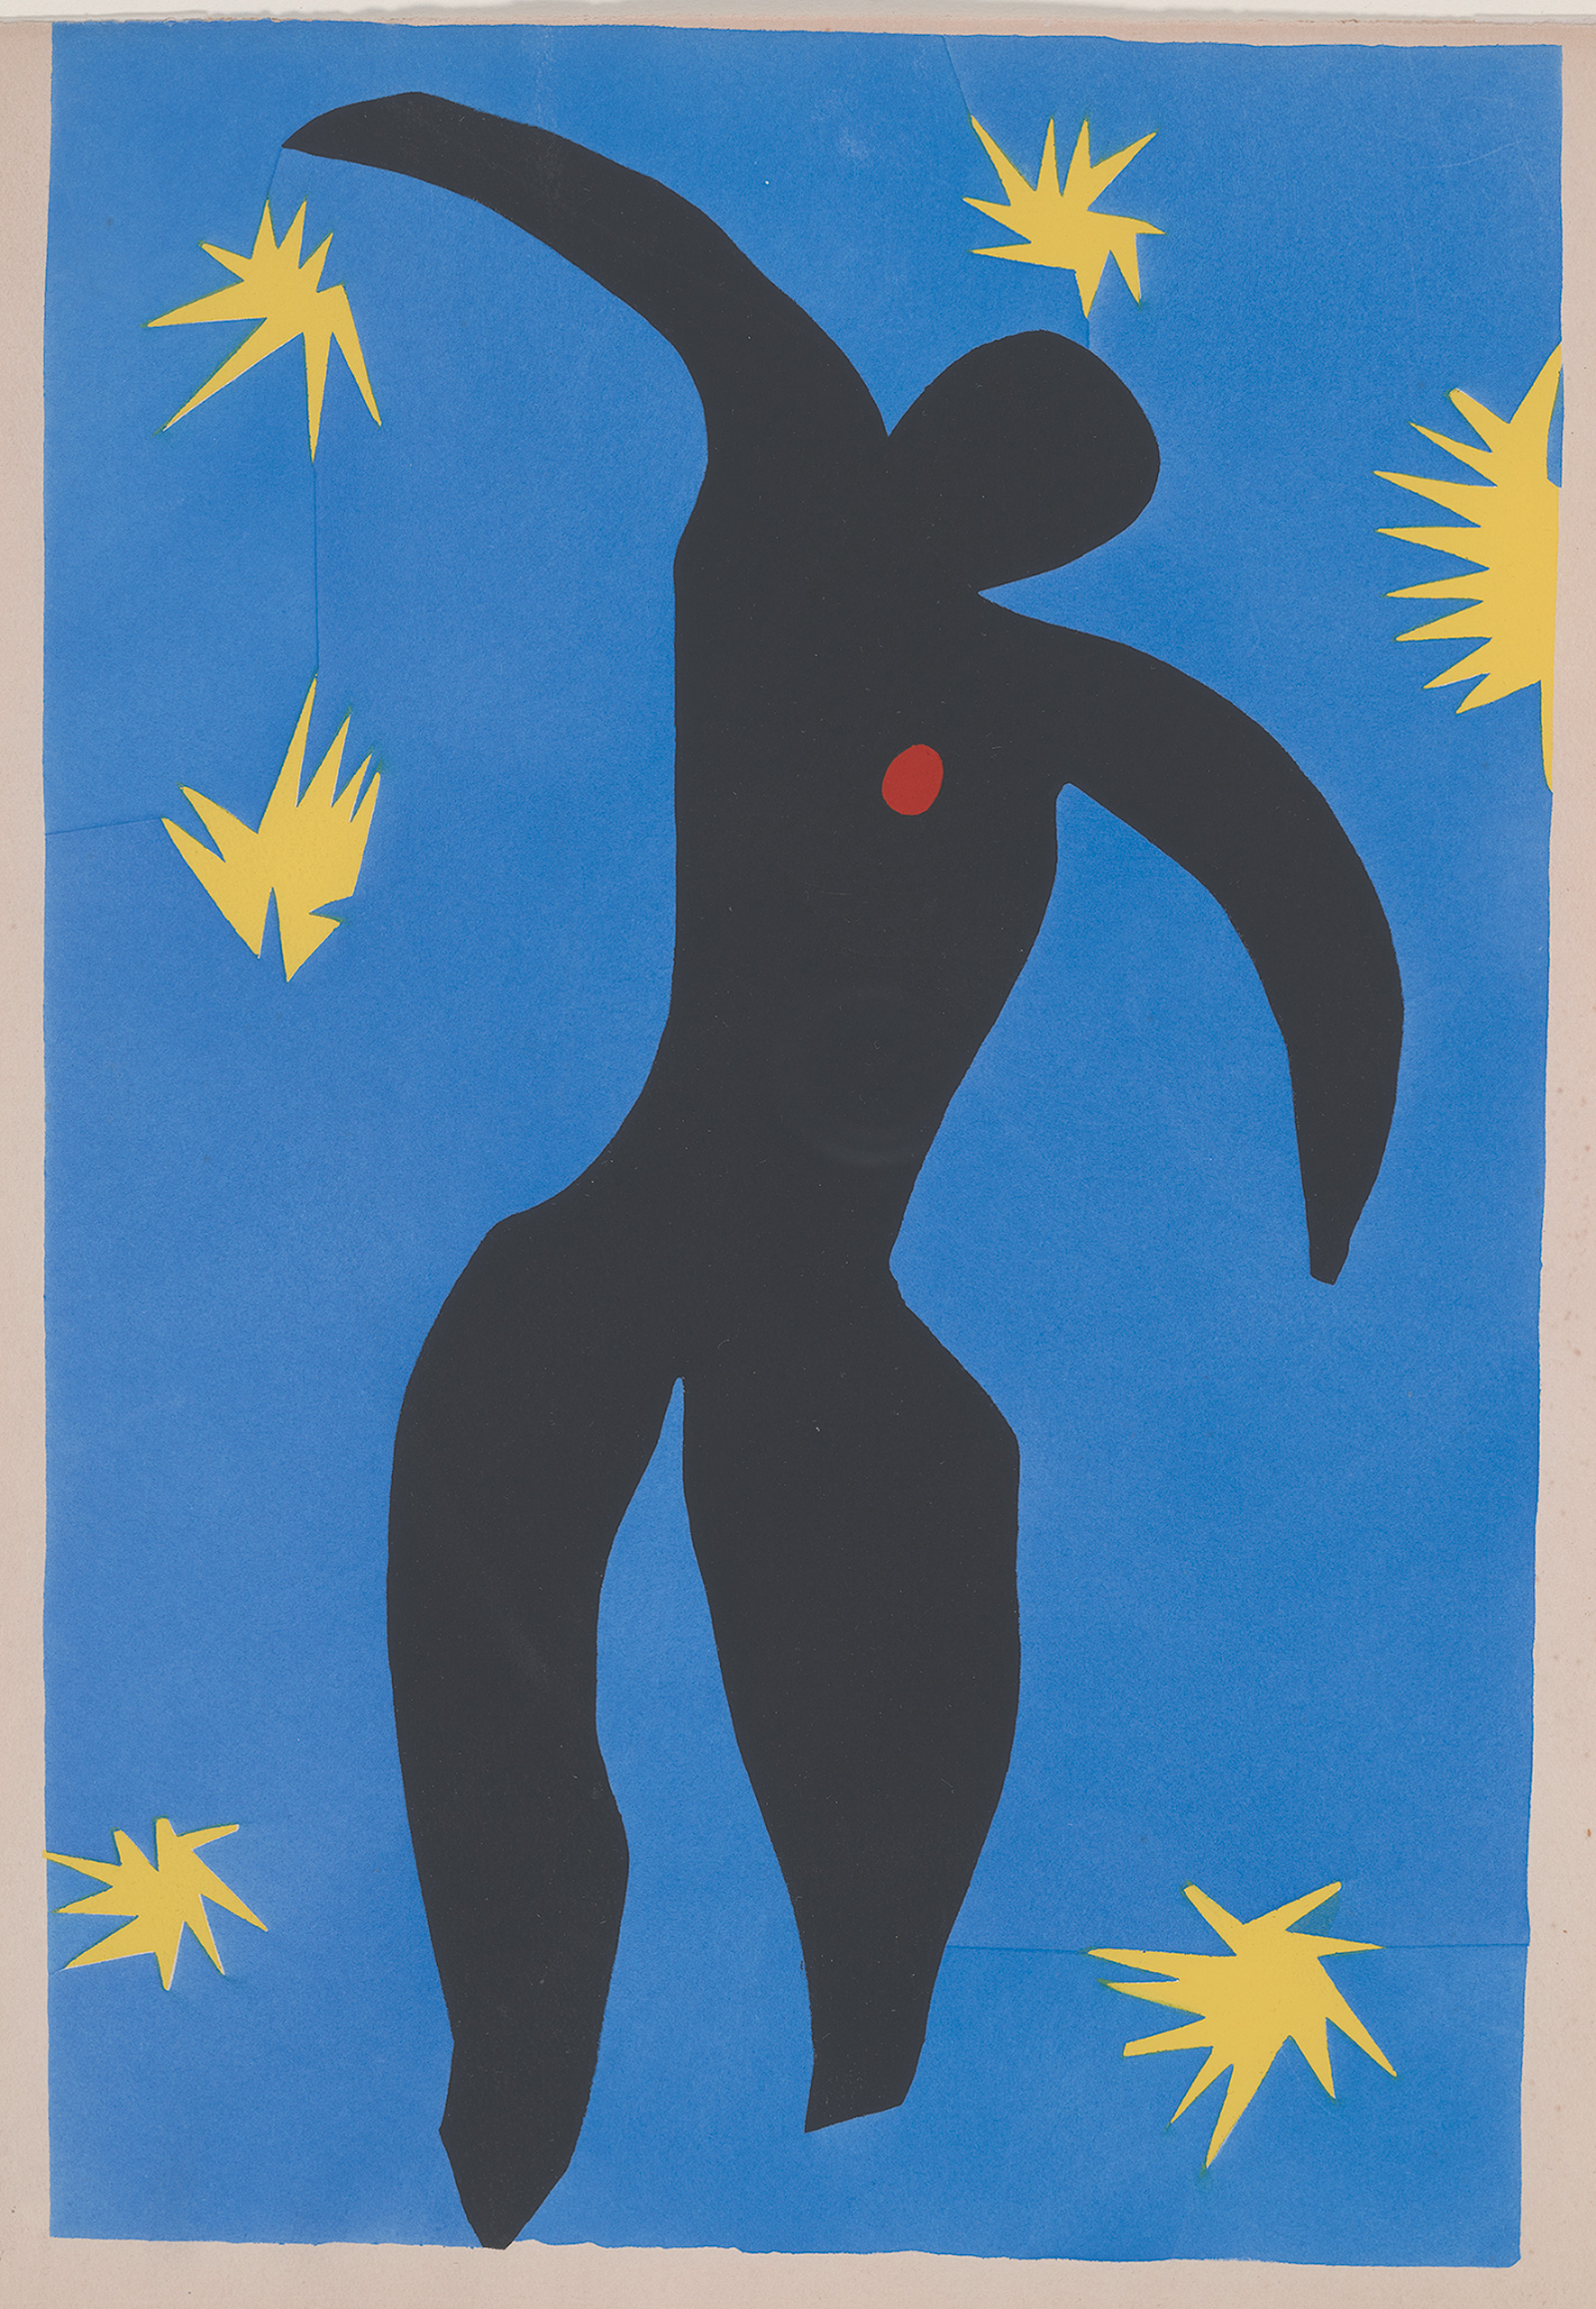 Henri Matisse: Icarus, 1947; from the Morgan Library and Museum’s recent exhibition ‘Graphic Passion: Matisse and the Book Arts,’ reviewed by Jed Perl in the May 12 issue